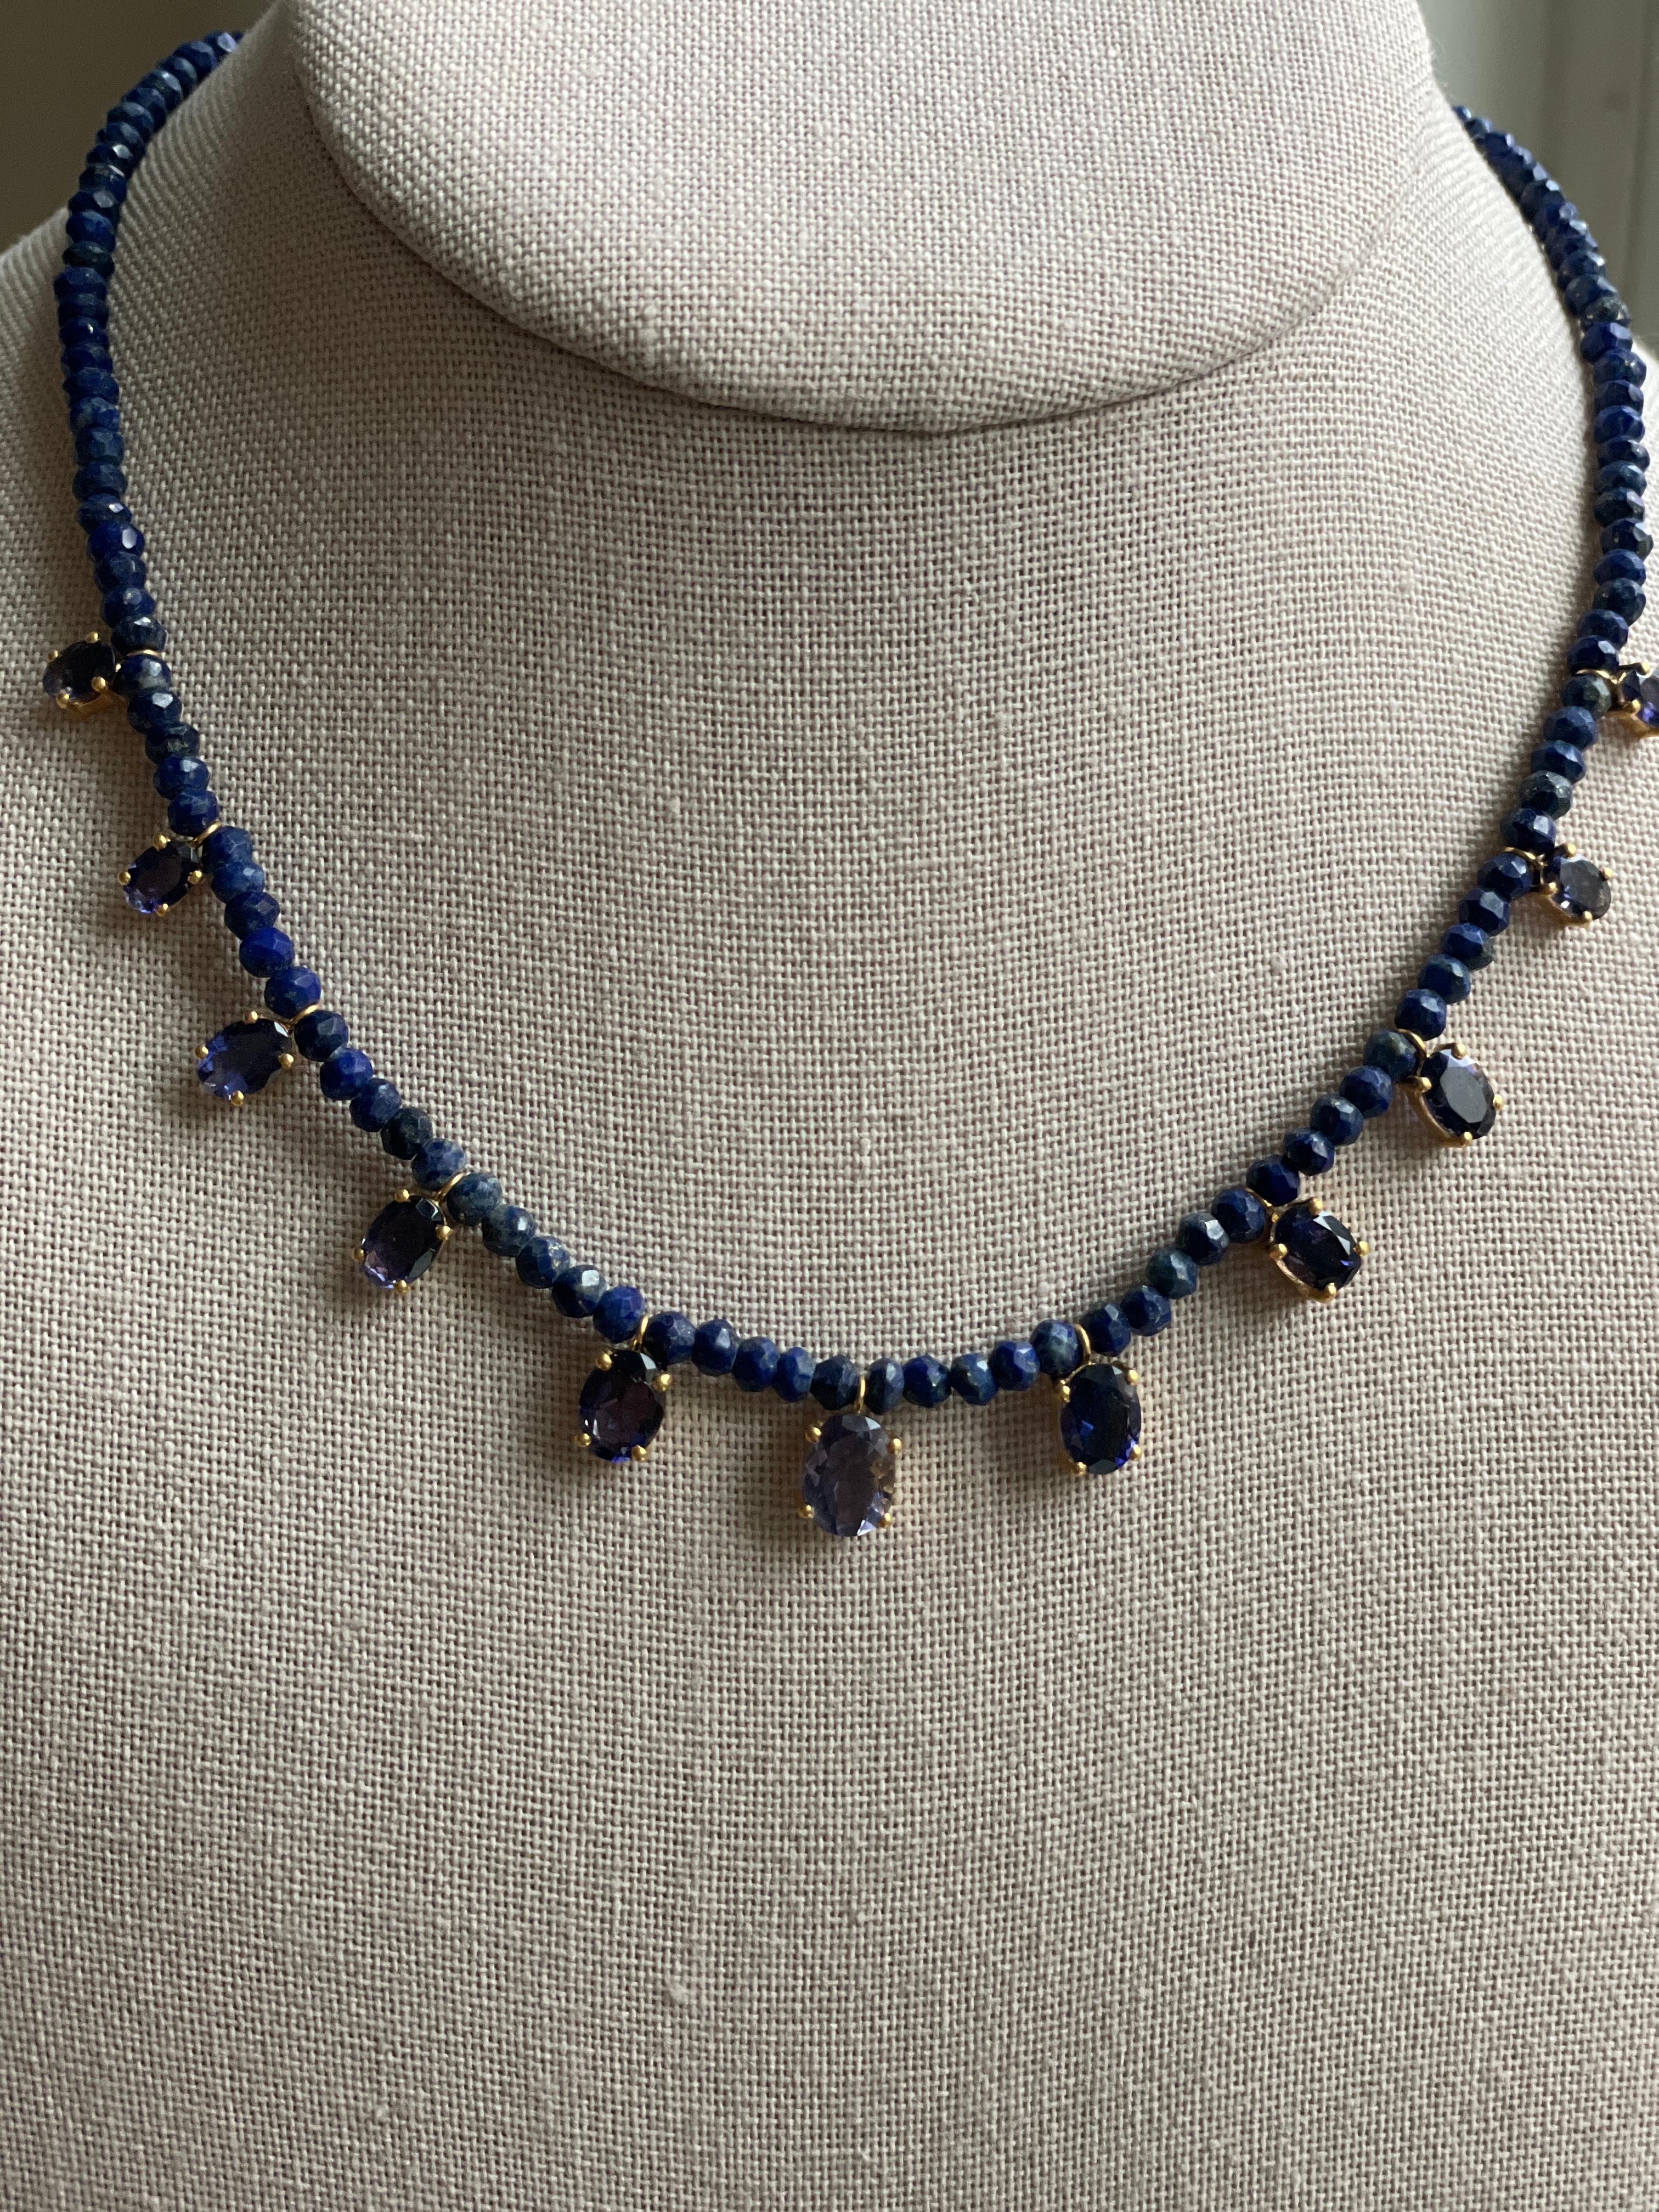 Comprised of 11 Iolite Ovals, this necklace is a blue lovers dream. The rich hues of deep blue shine and sparkle throughout this piece. The ovals graduate in size with the center stone as the largest. These Ioilte oval gemstones are set in 14K gold